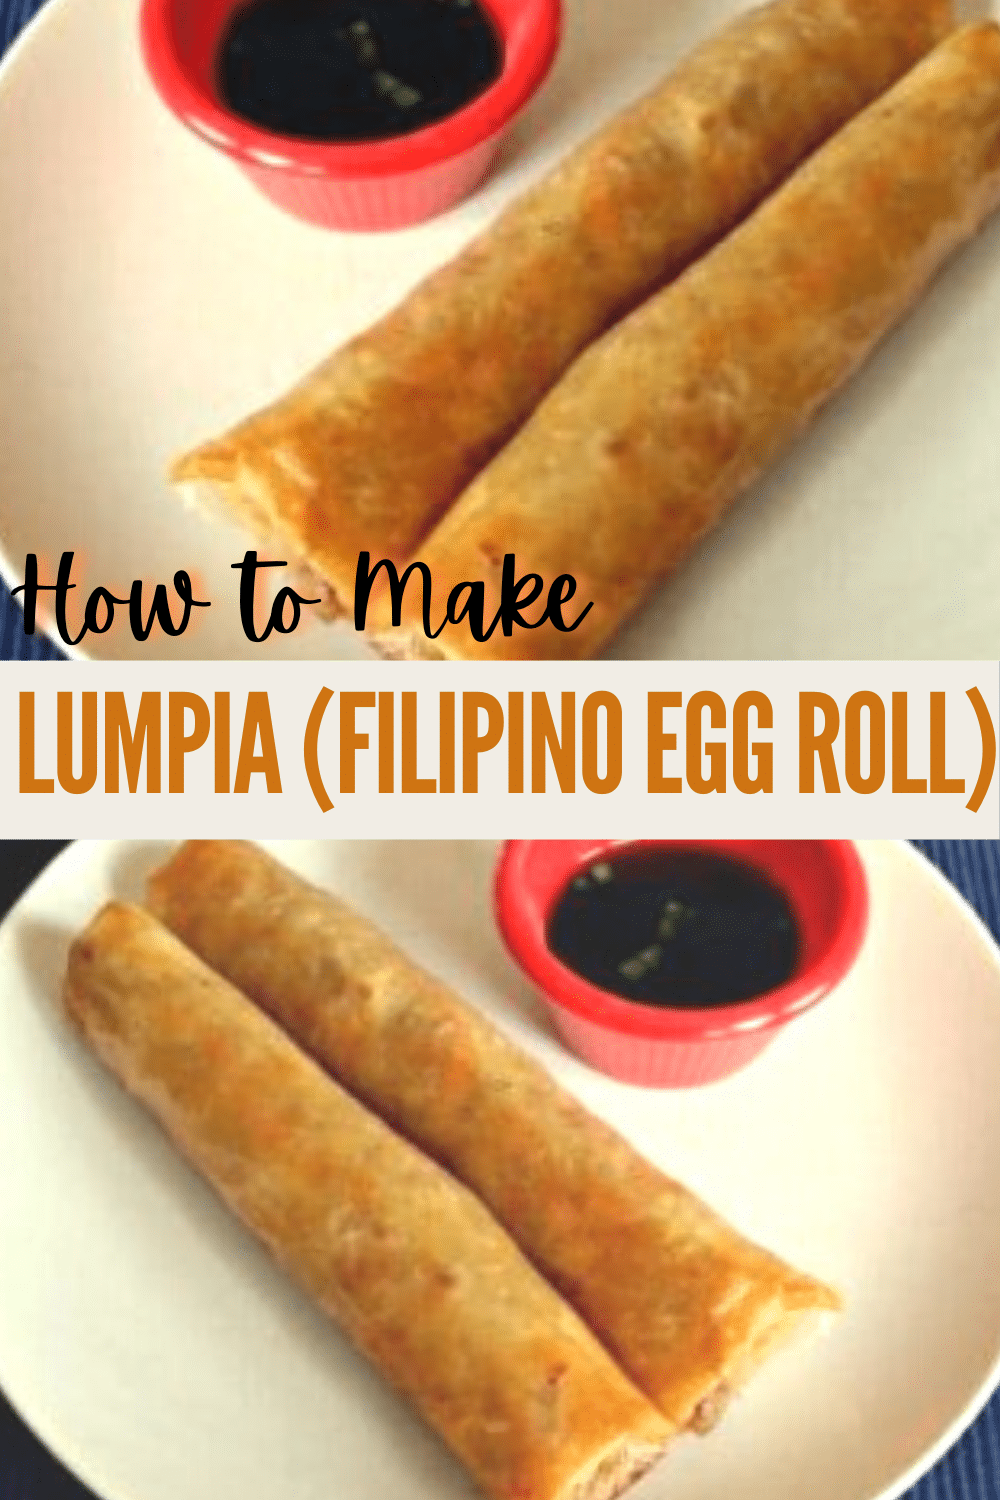 Do you want to learn how to make lumpia? Here's an easy-to-follow recipe for lumpia (Filipino egg rolls), the delicious appetizer that everyone loves. #lumpia #filipinofood #recipe #appetizer via @wondermomwannab